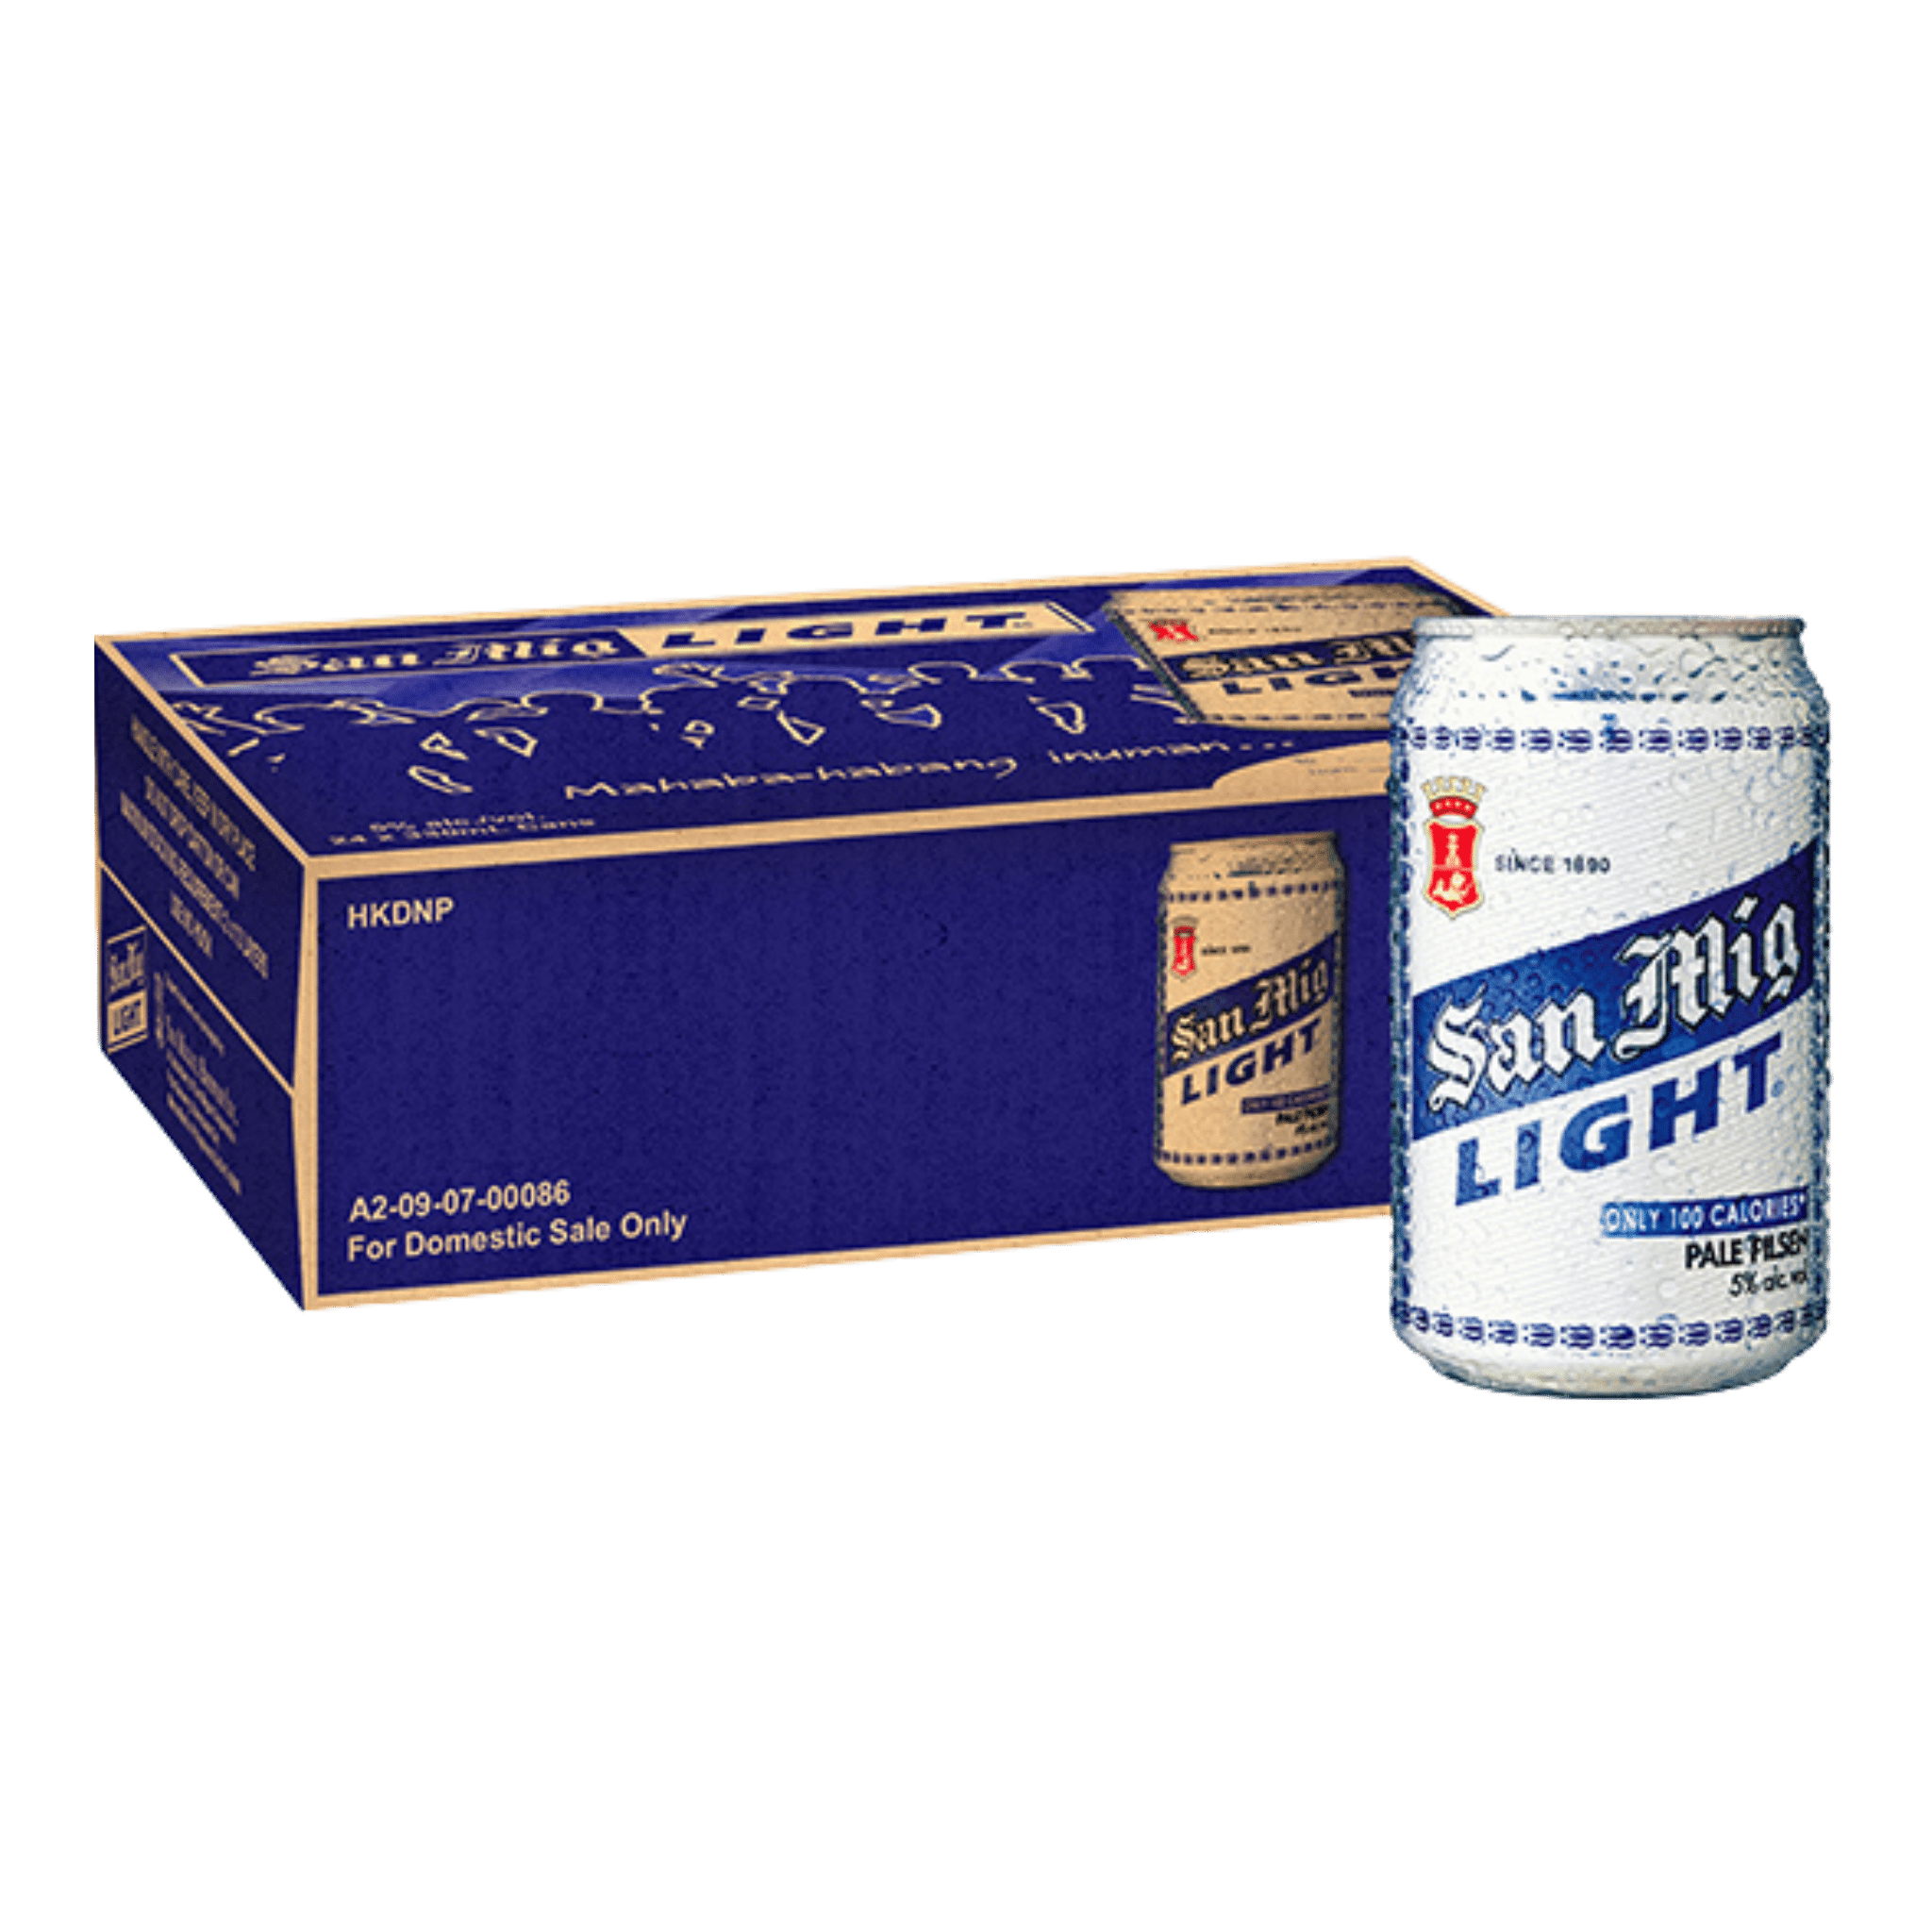 San Mig Light 330 mL Can Case of 24